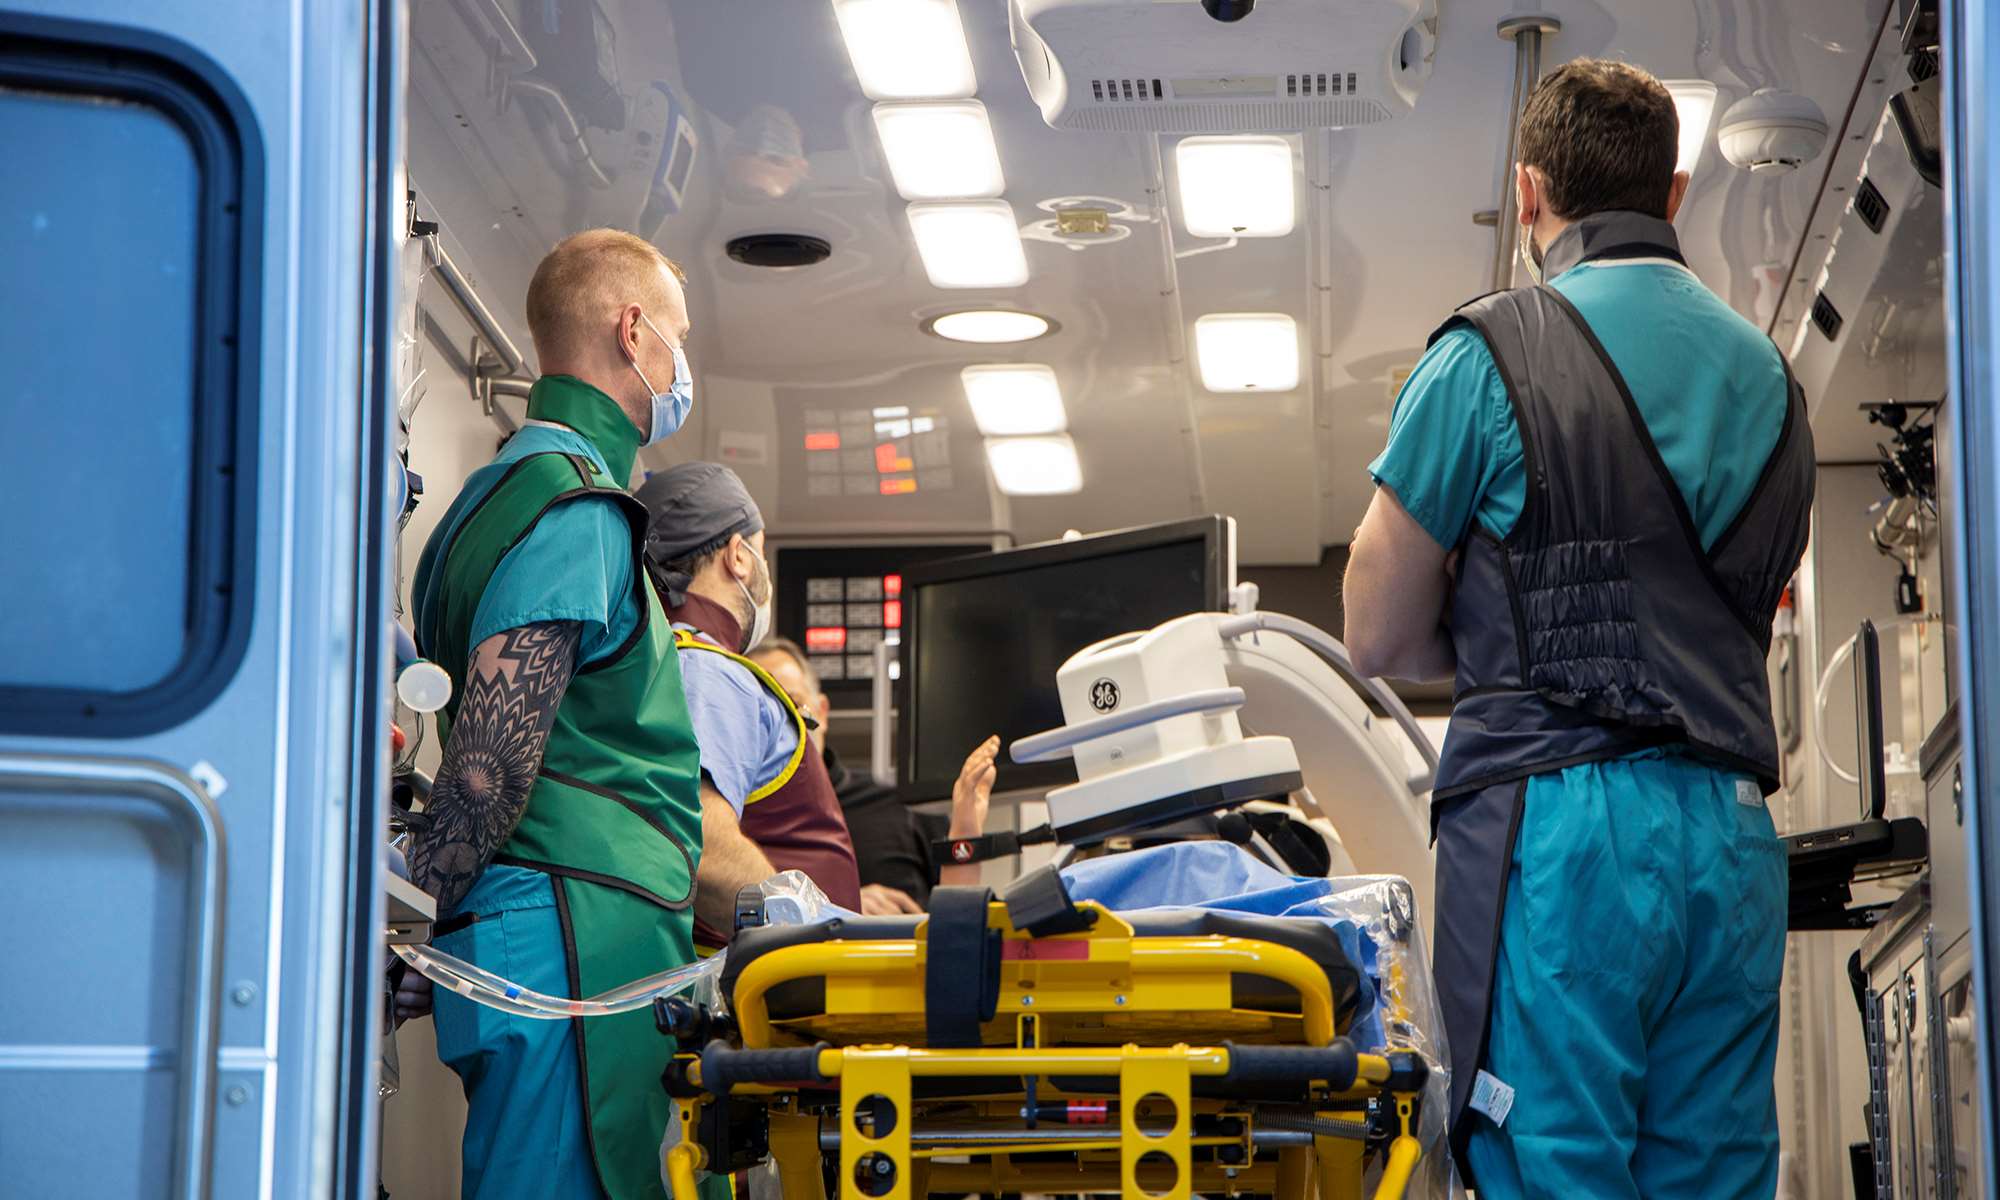 A team of paramedics and healthcare providers offers new hope